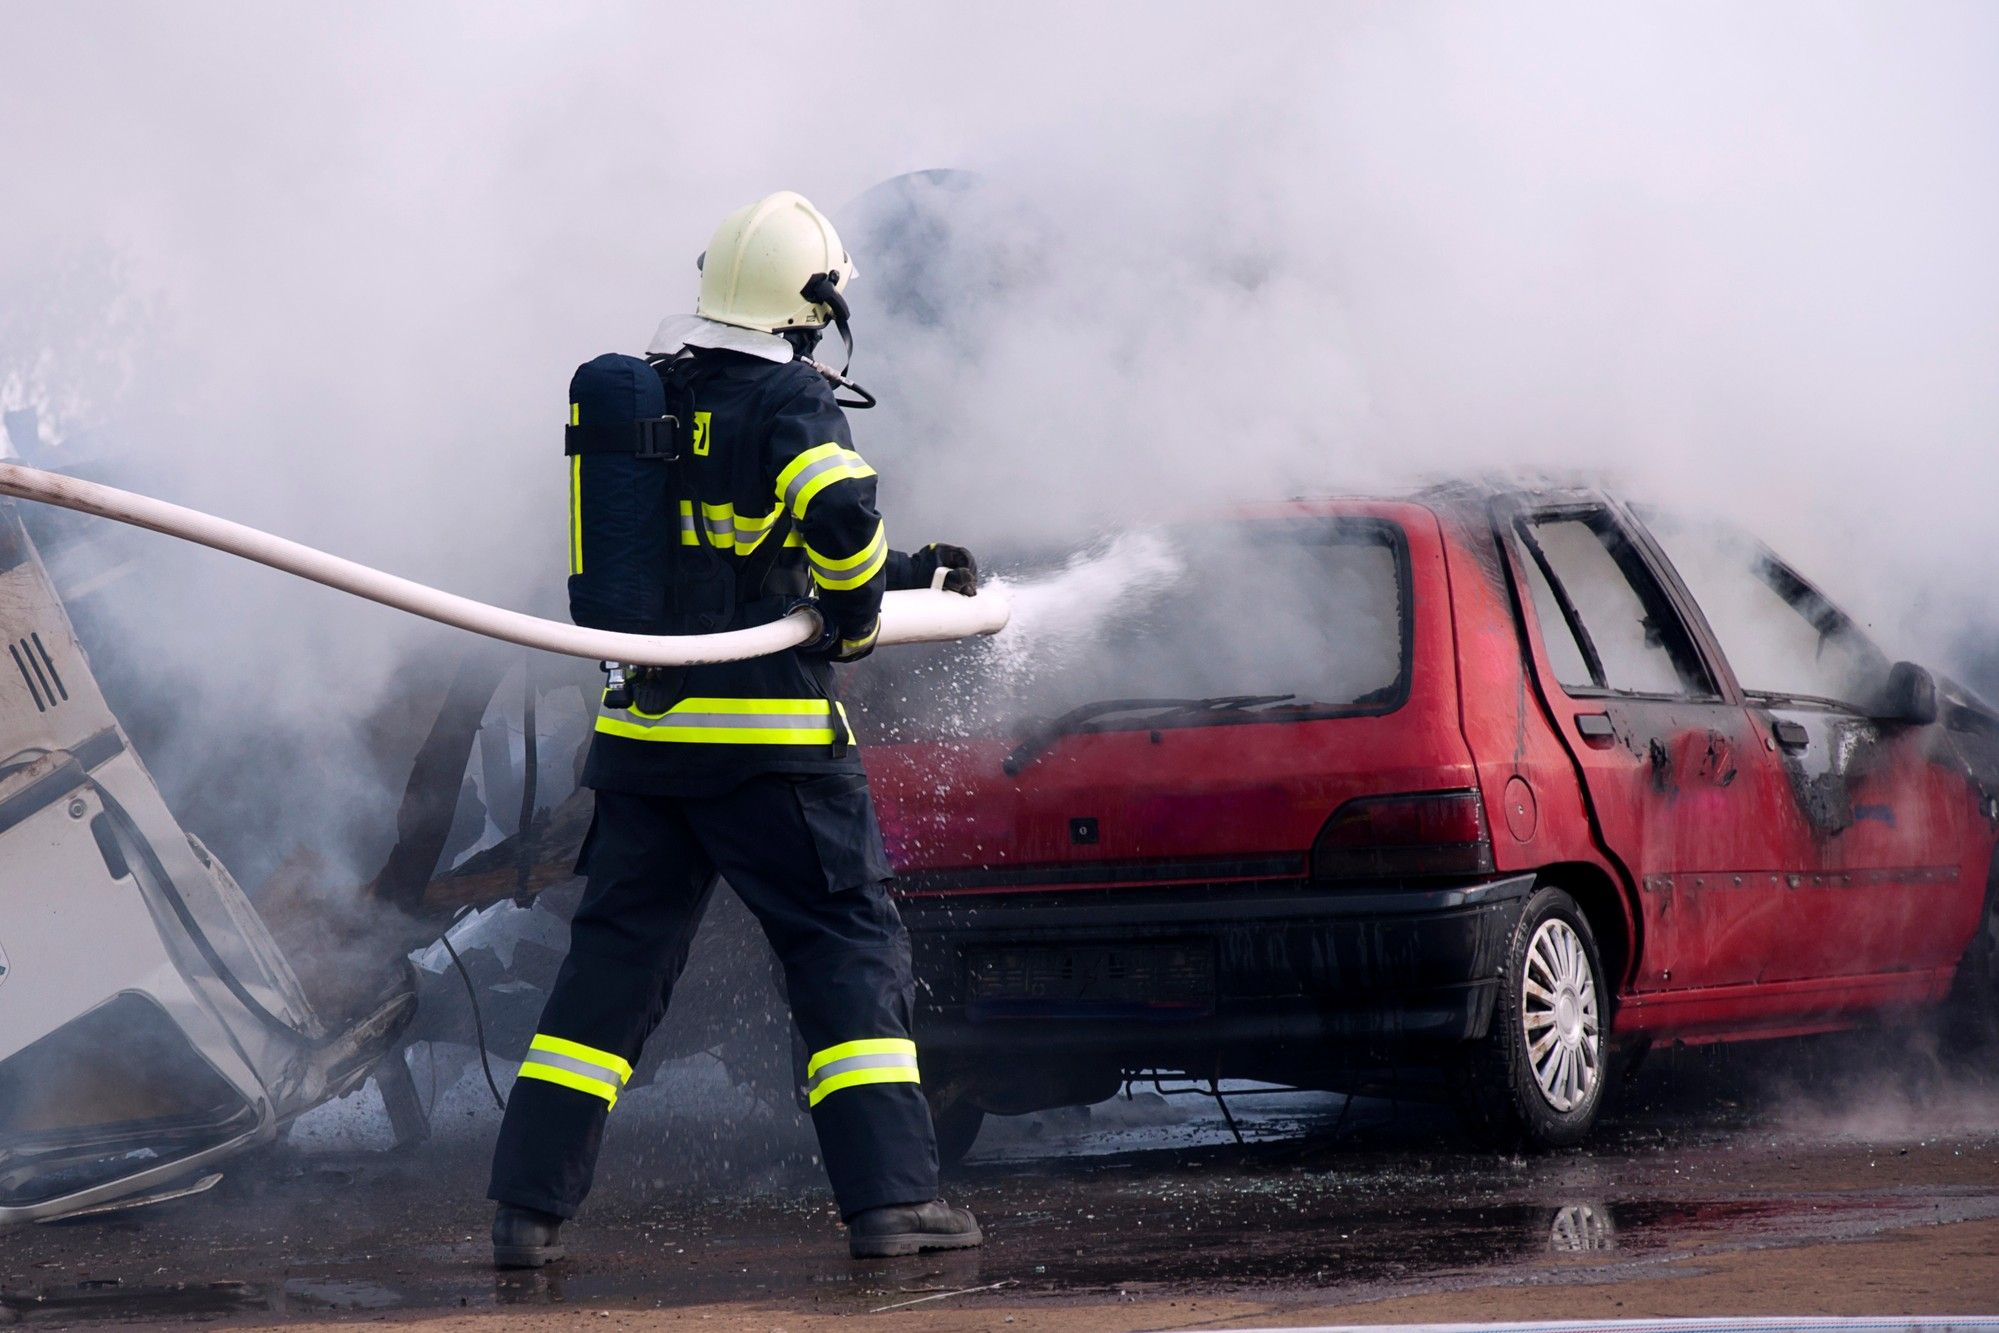 Firefighting foam may put firefighters at risk of cancer.